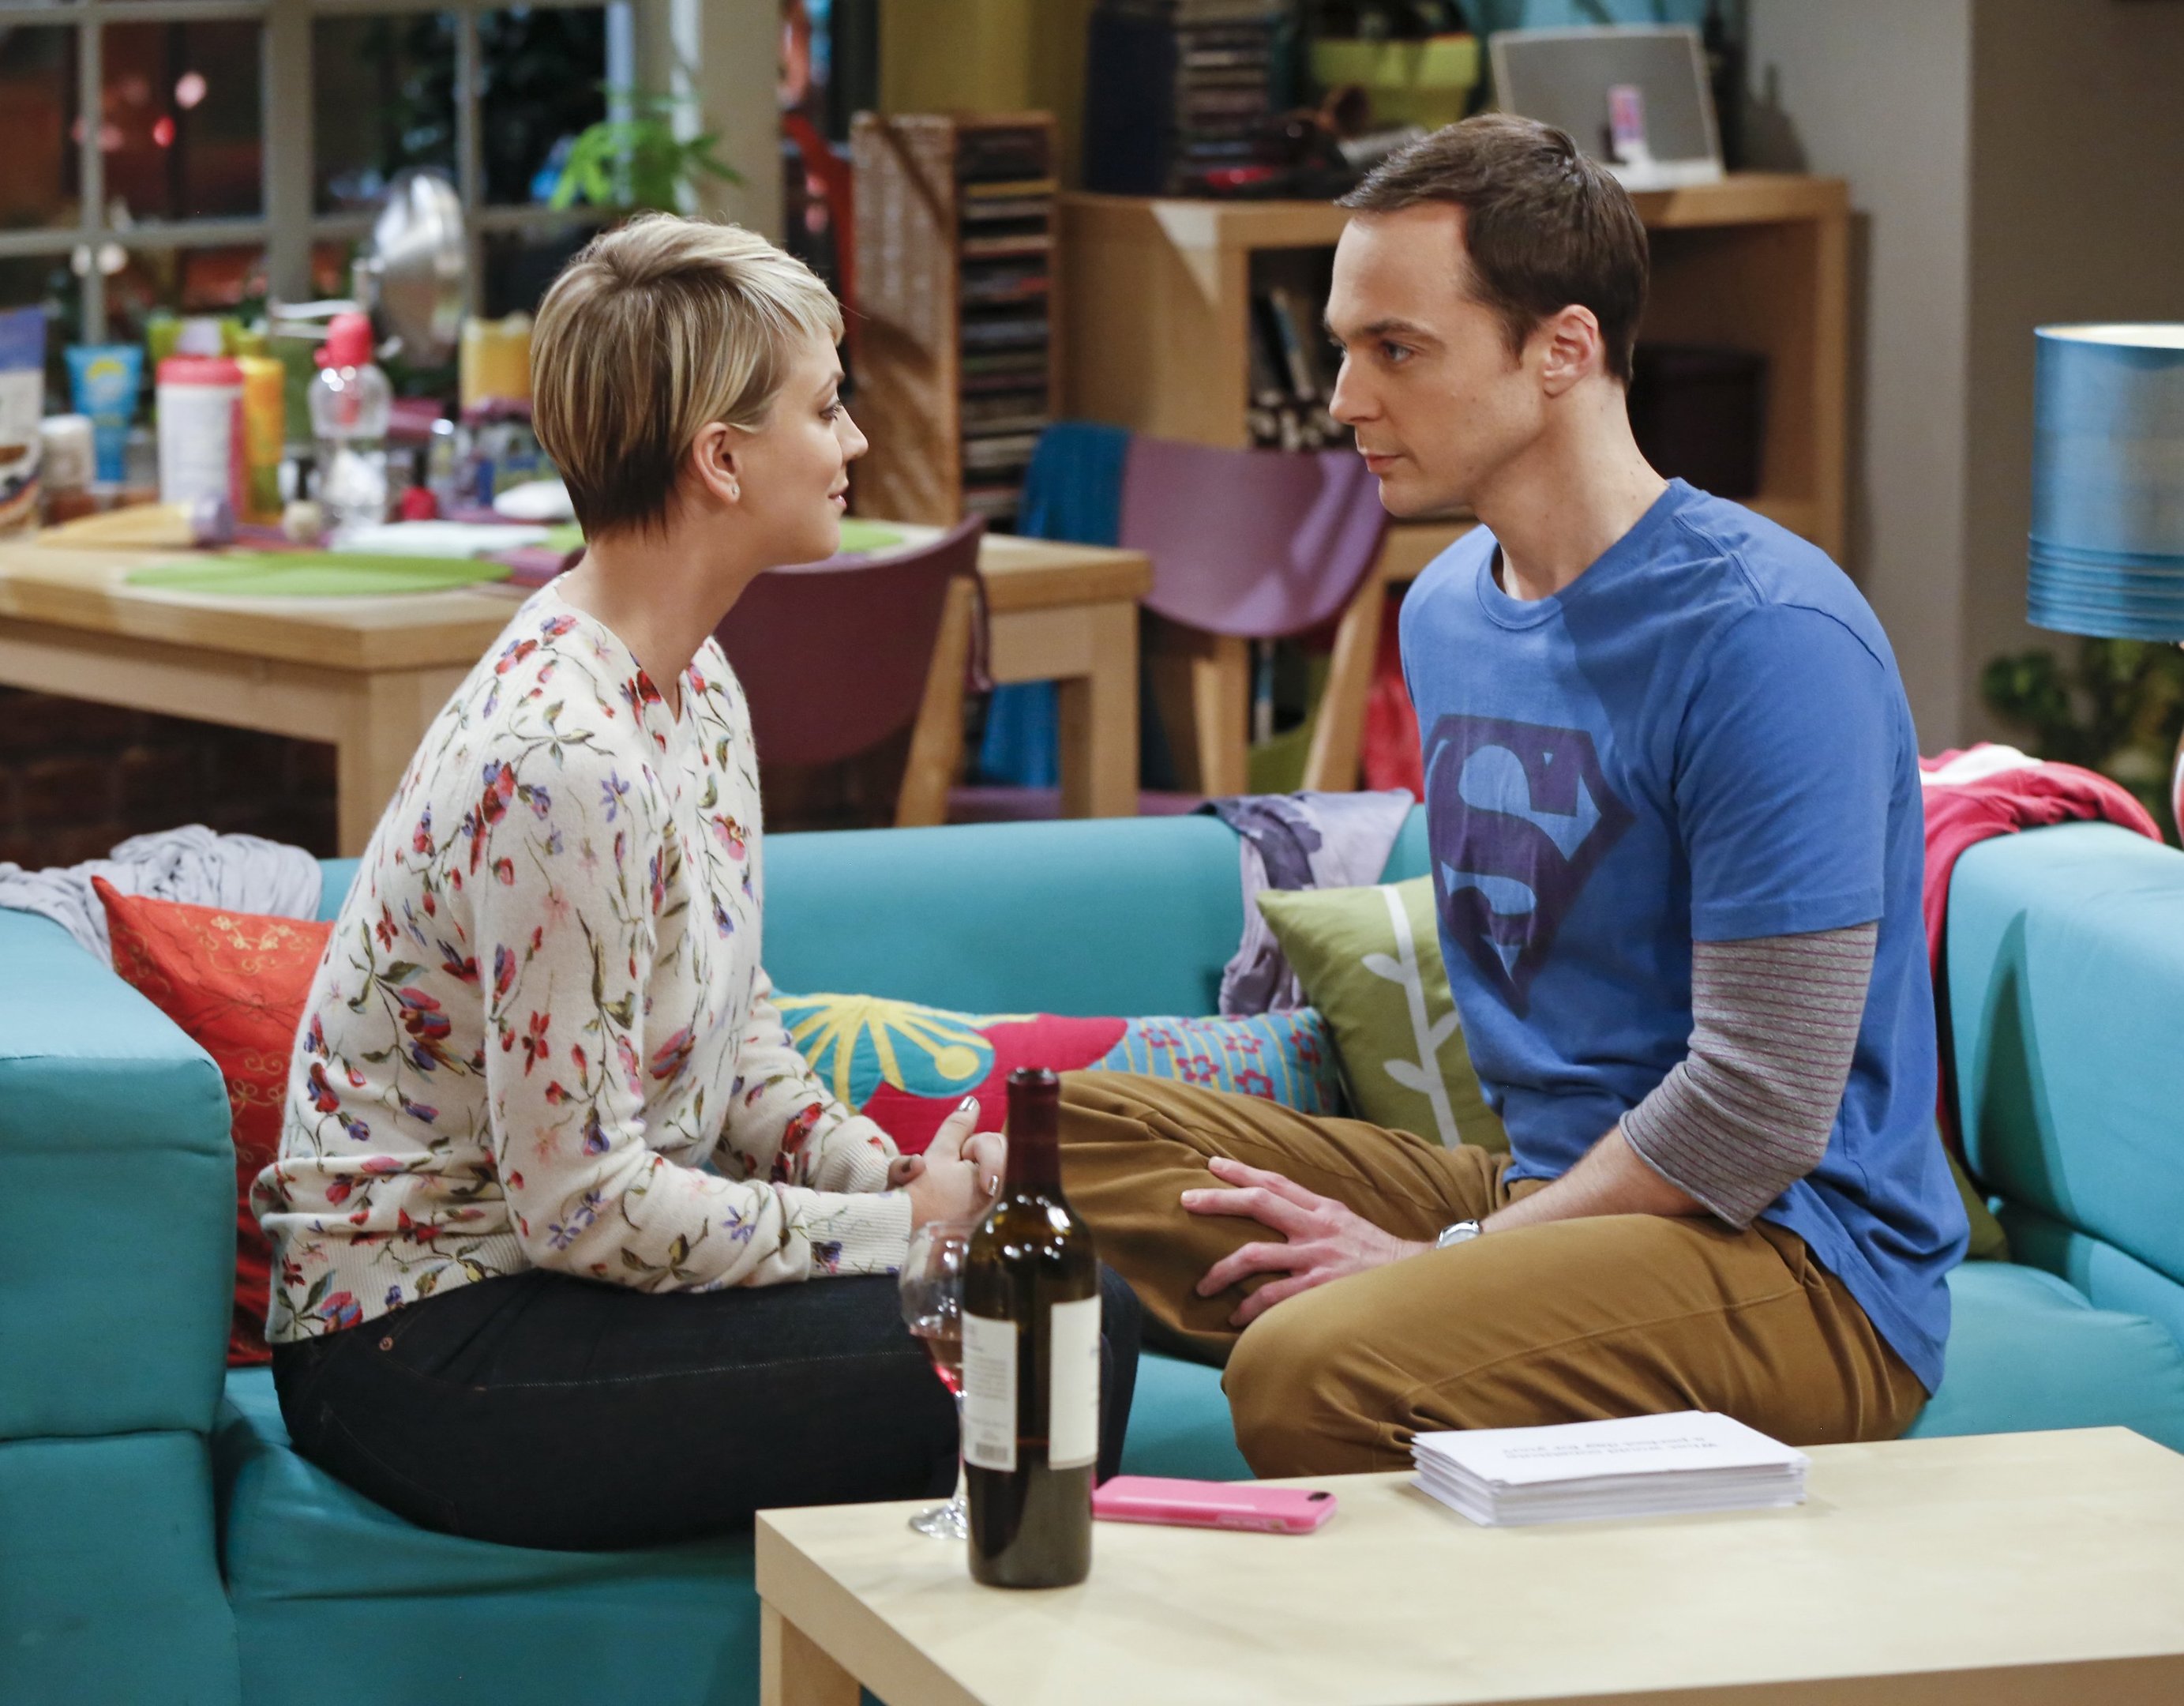 Kaley Cuoco, who plays Penny, and Jim Parsons, who plays Sheldon Cooper, in an episode of The Big Bang Theory